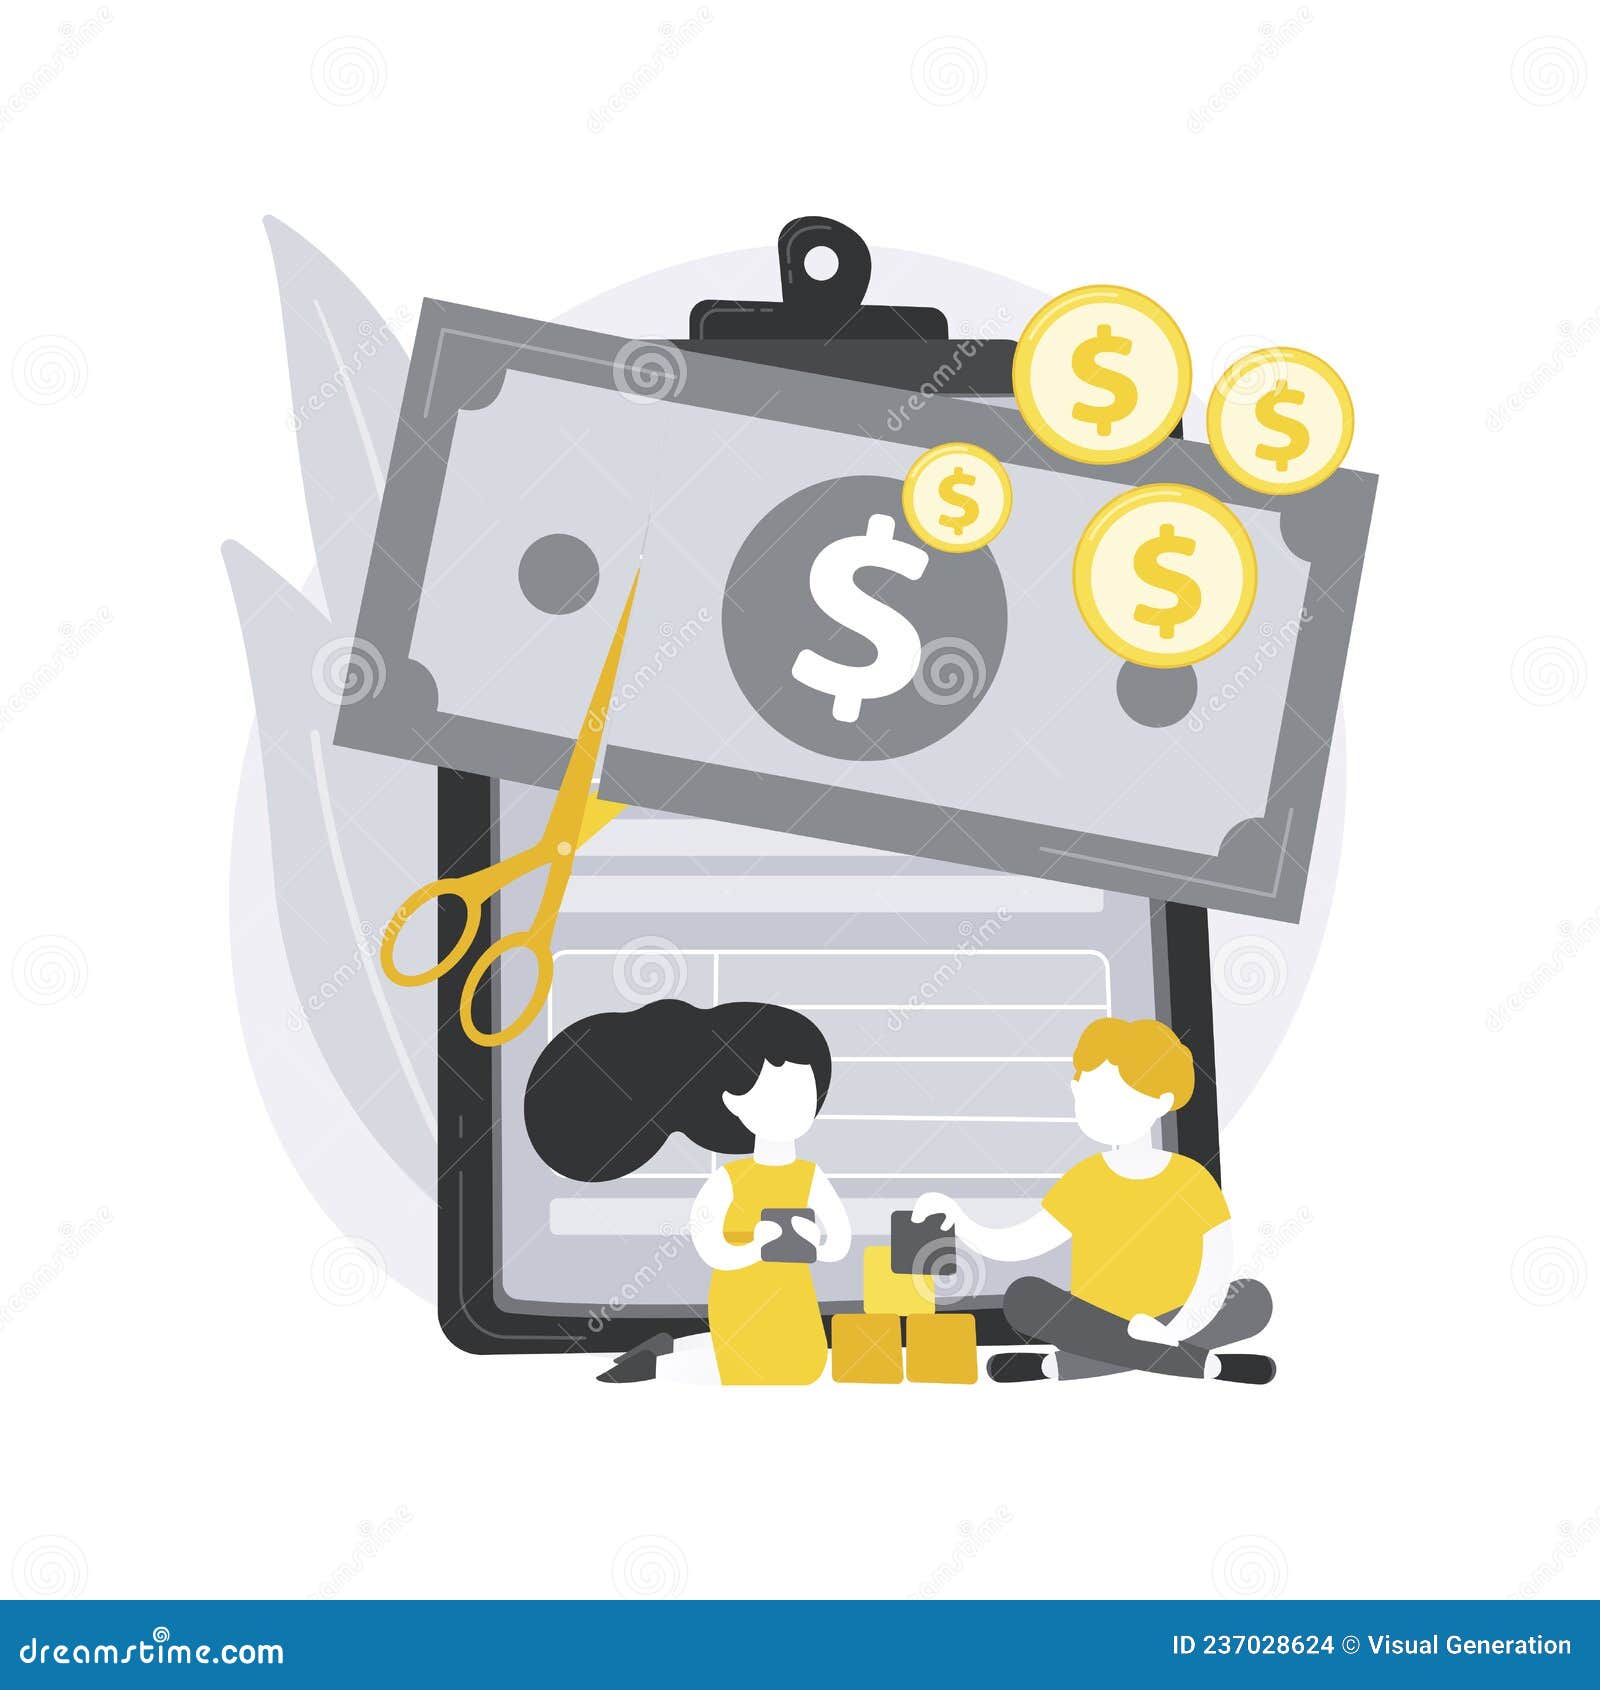 child-tax-benefit-stock-vector-images-alamy